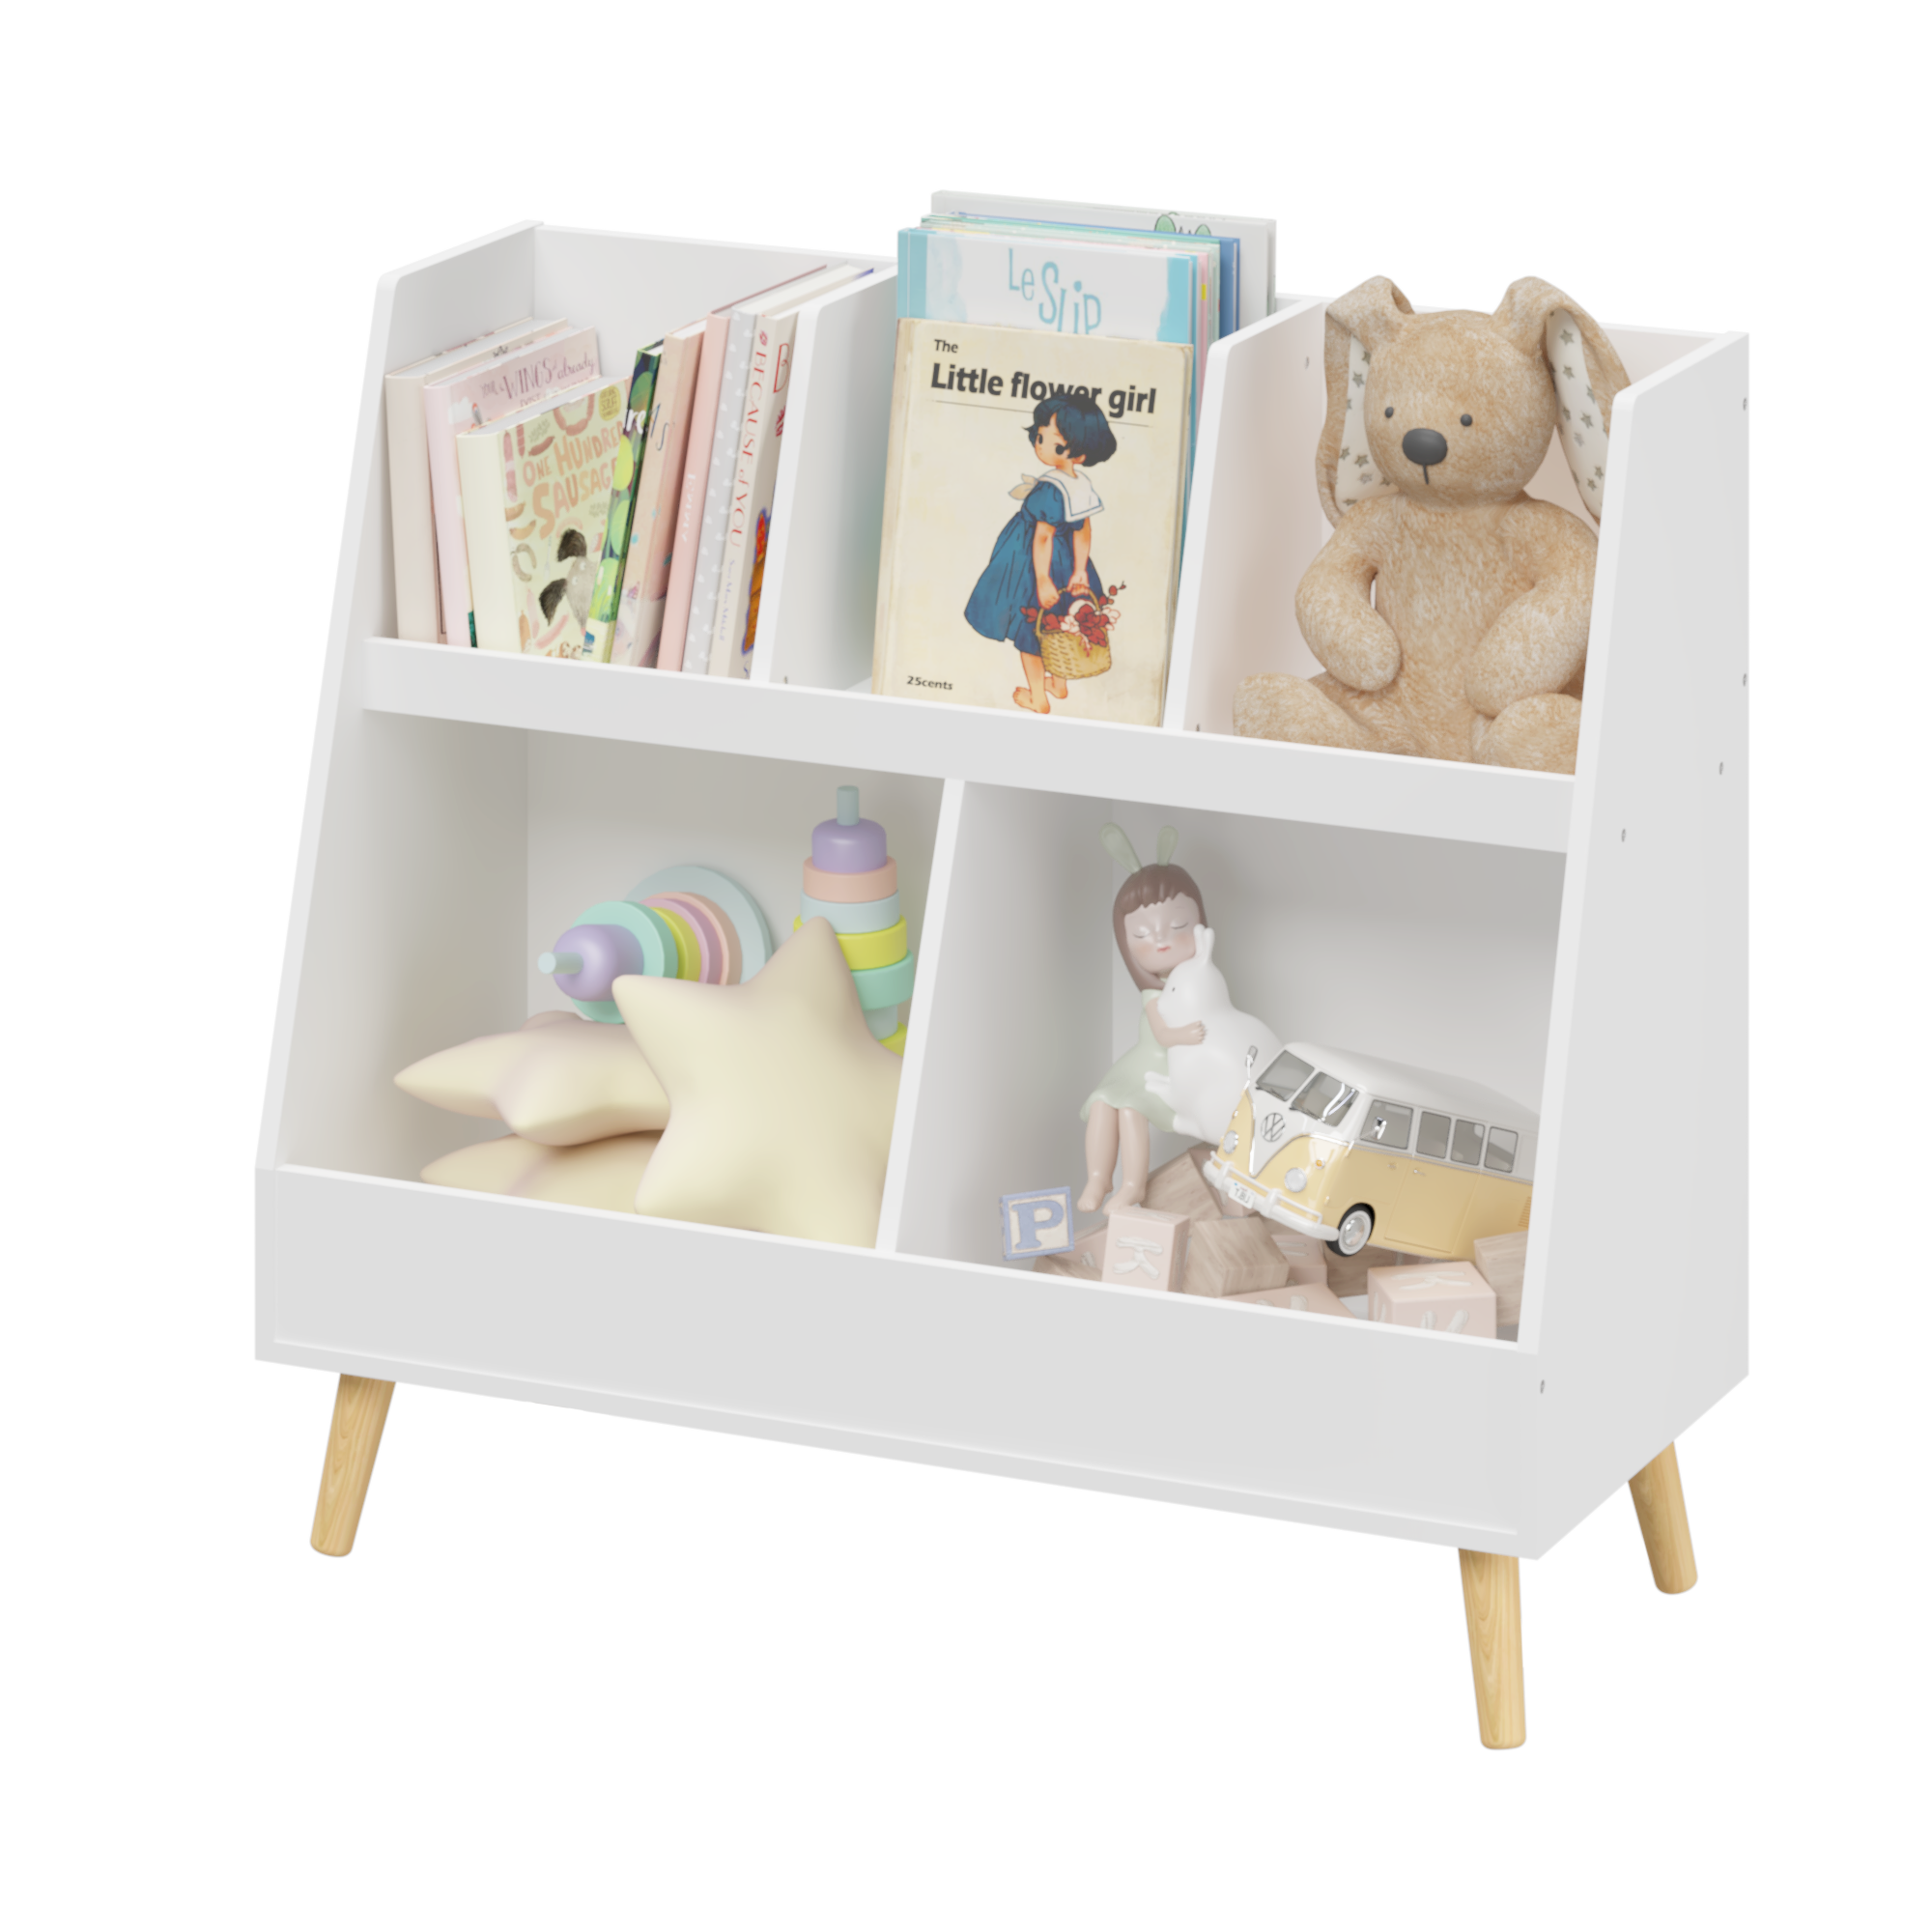 Kids Bookshelf and Toy Organizer, 5 Cubbies Wooden Open Bookcase, 2-Tier Baby Storage Display Organizer with Legs, Free Standing for Playing Room, Bedroom, Nursery, Classroom - White